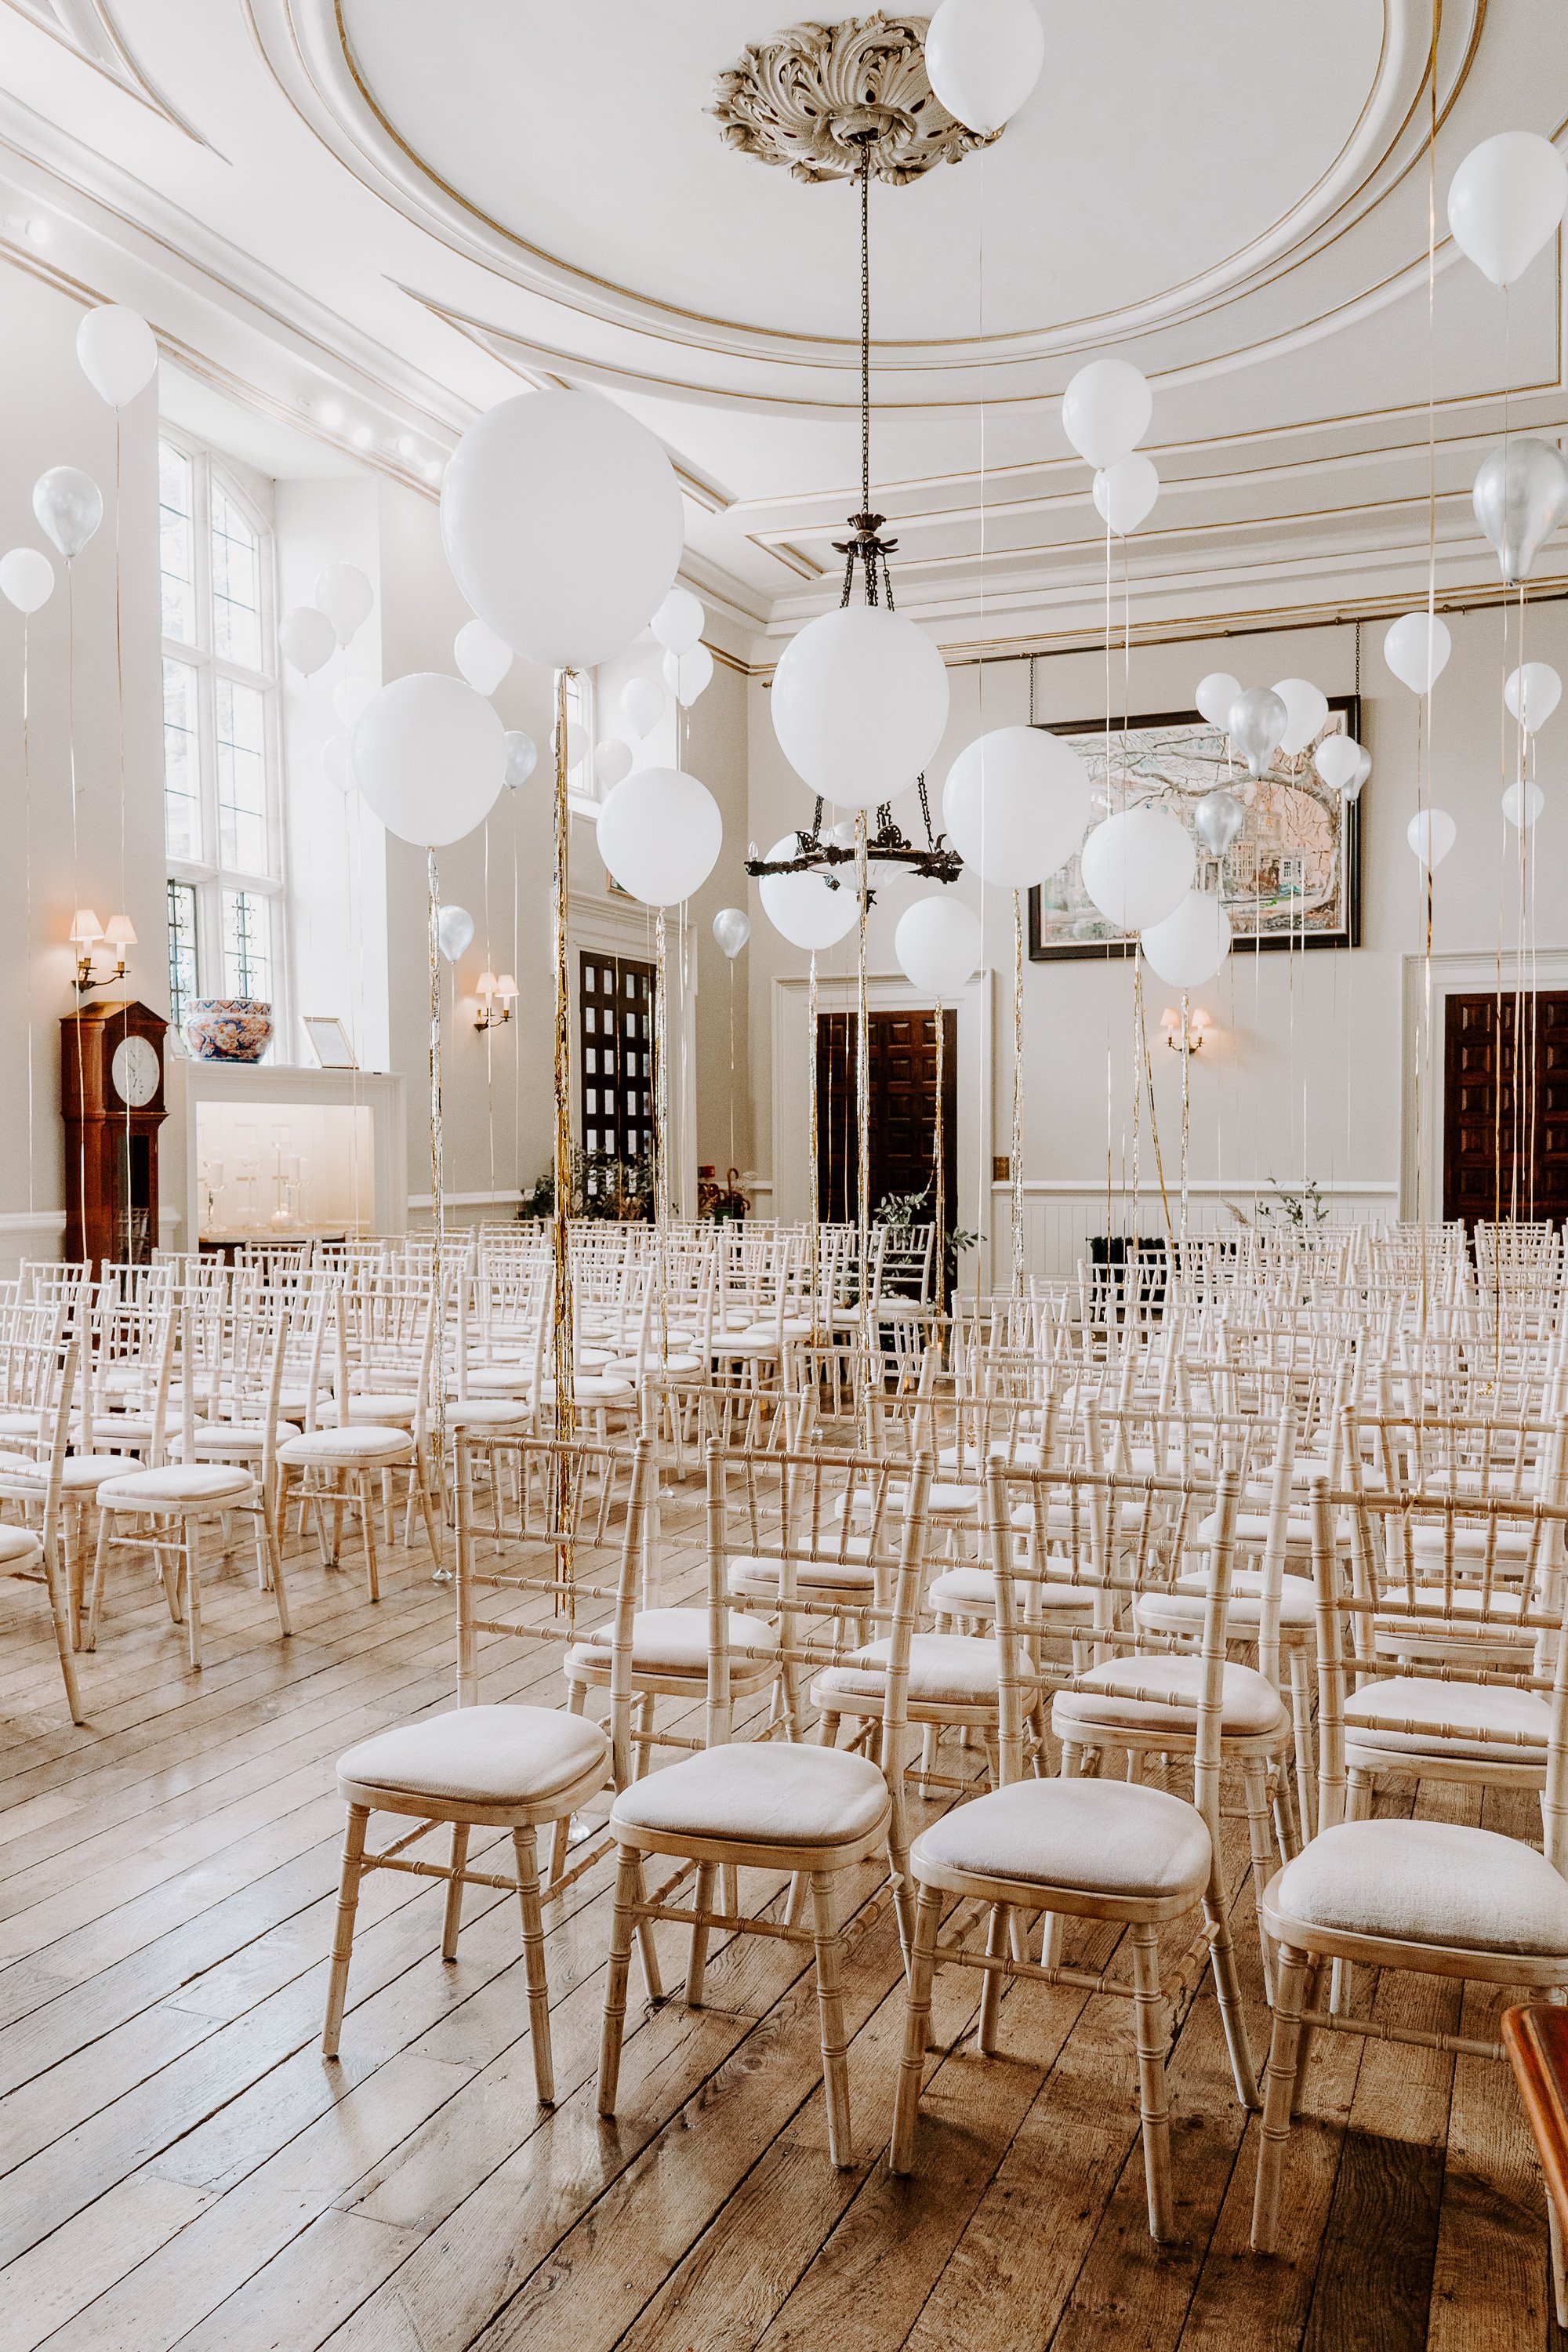 White balloons decorating the historic hall ceremony room look like pearls on strings at elmore court